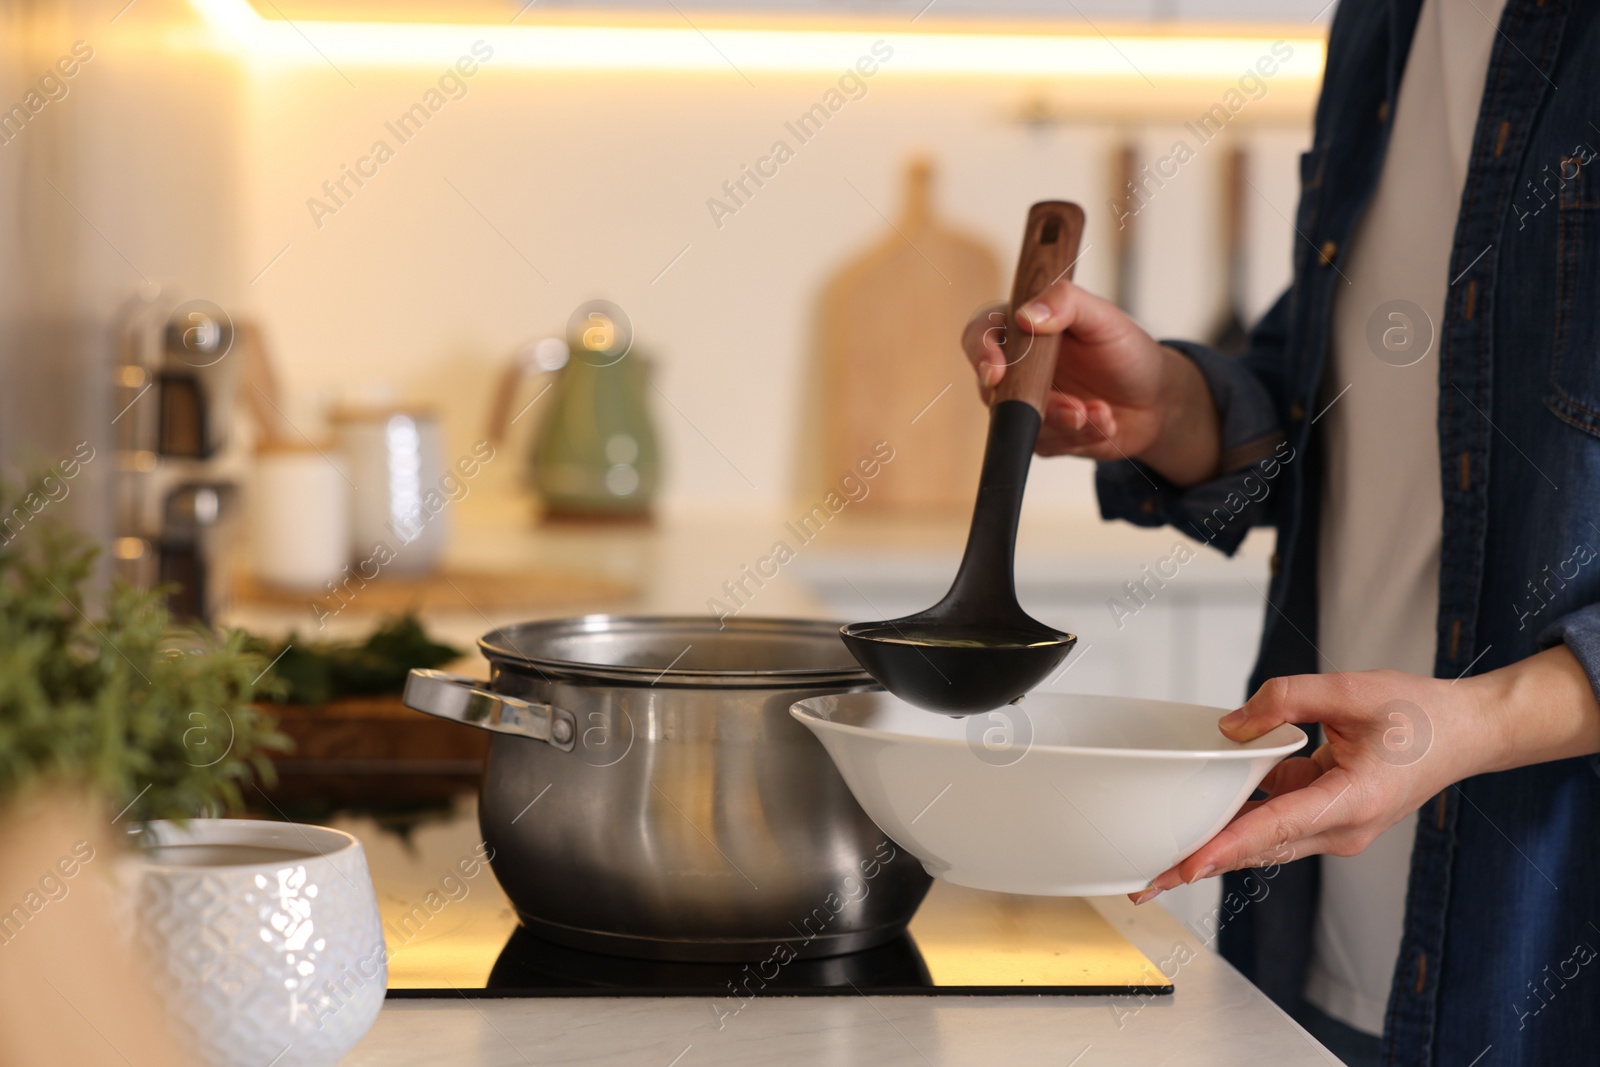 Photo of Woman pouring tasty soup into bowl at countertop in kitchen, closeup